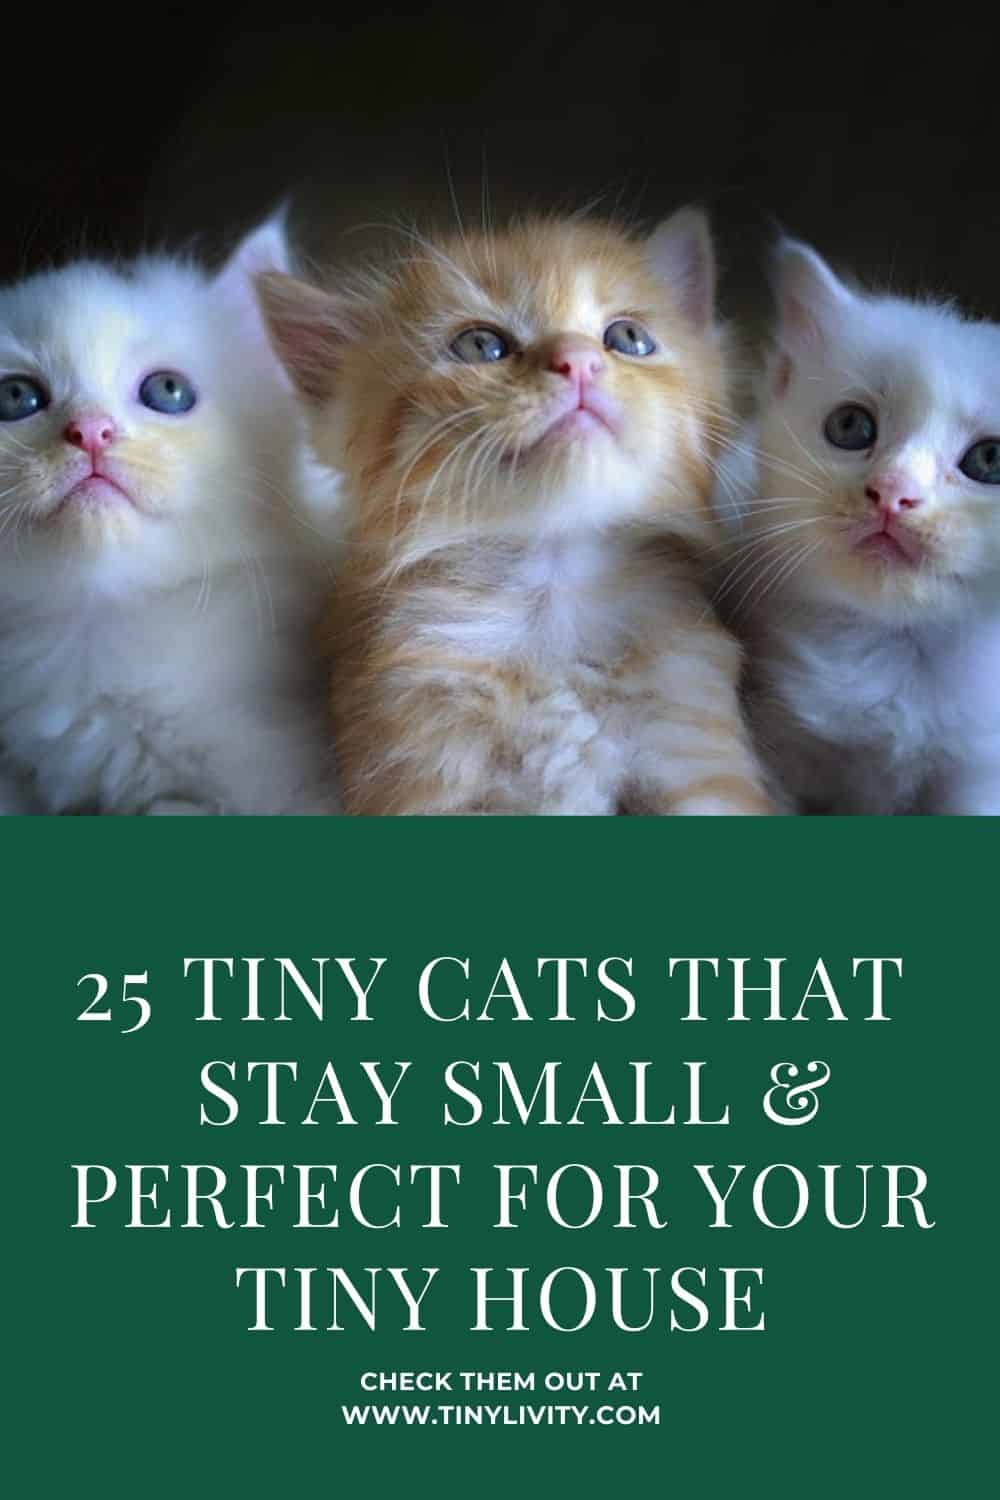 25 Tiny Cats That Stay Small & Perfect For Tiny House